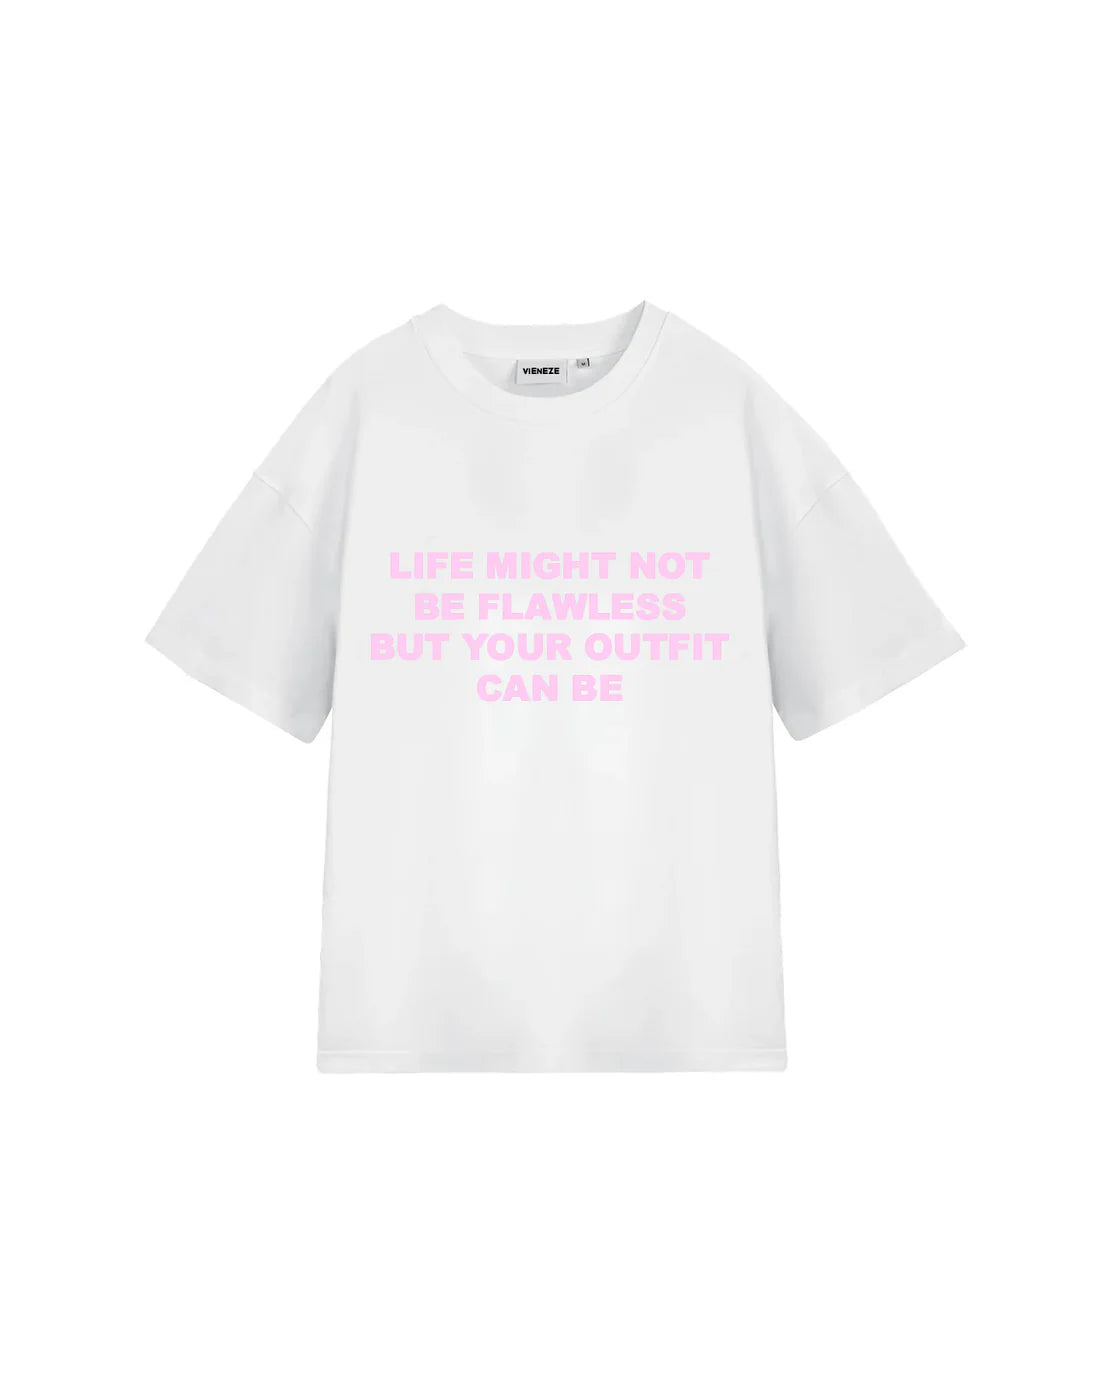 VIENEZE 'not be flawless' Tee (pink)